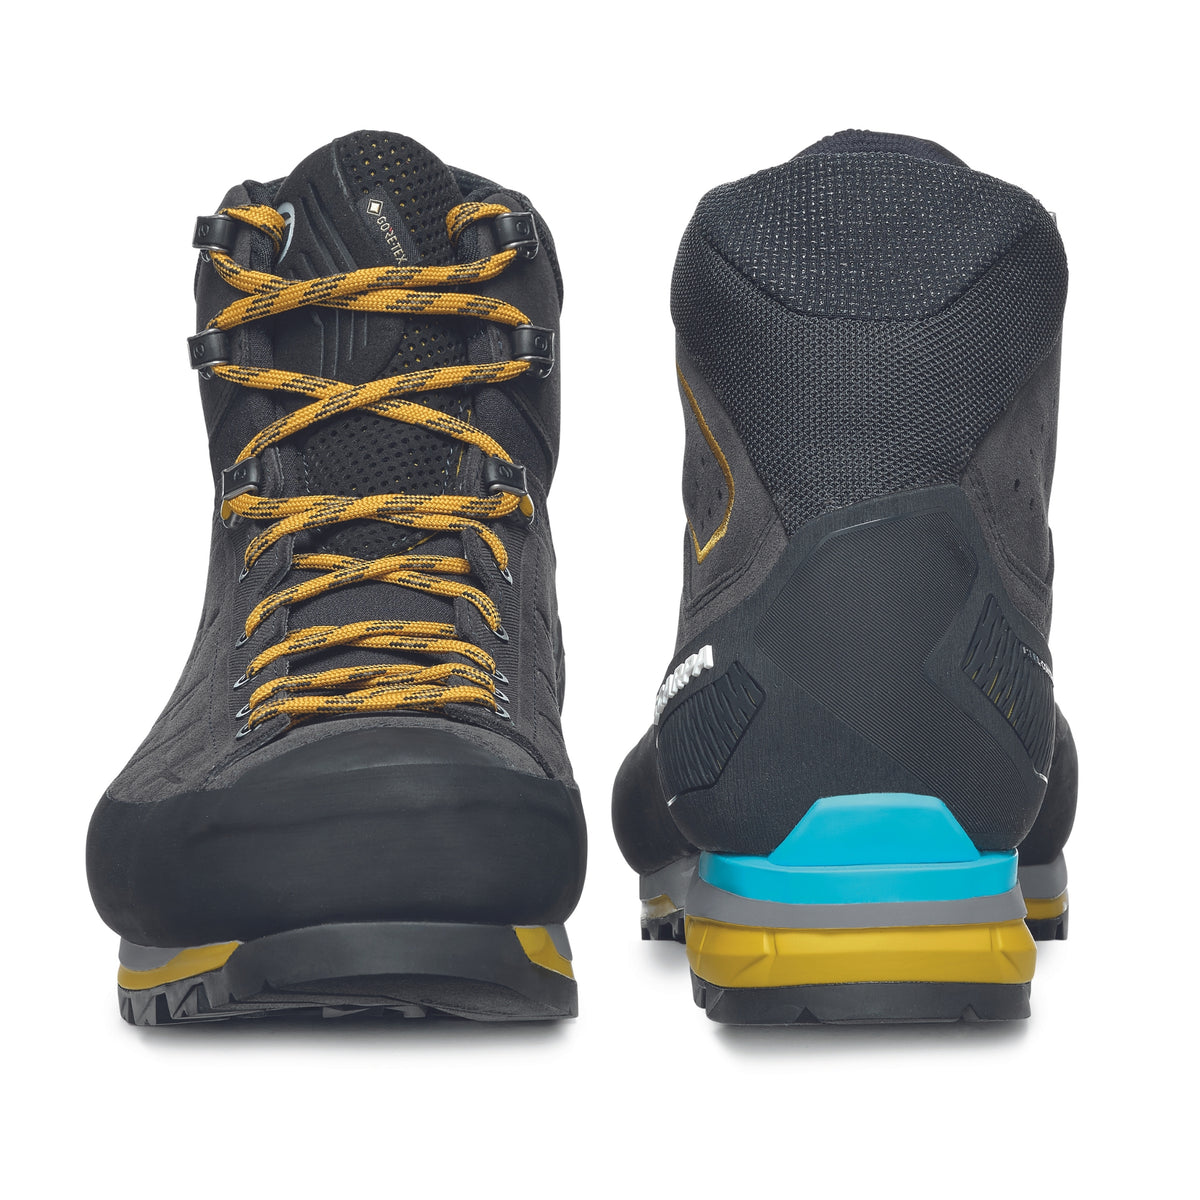 Scarpa Zodiac Tech GTX mens boots in anthracite sulphur colour. Showing toe box and heel